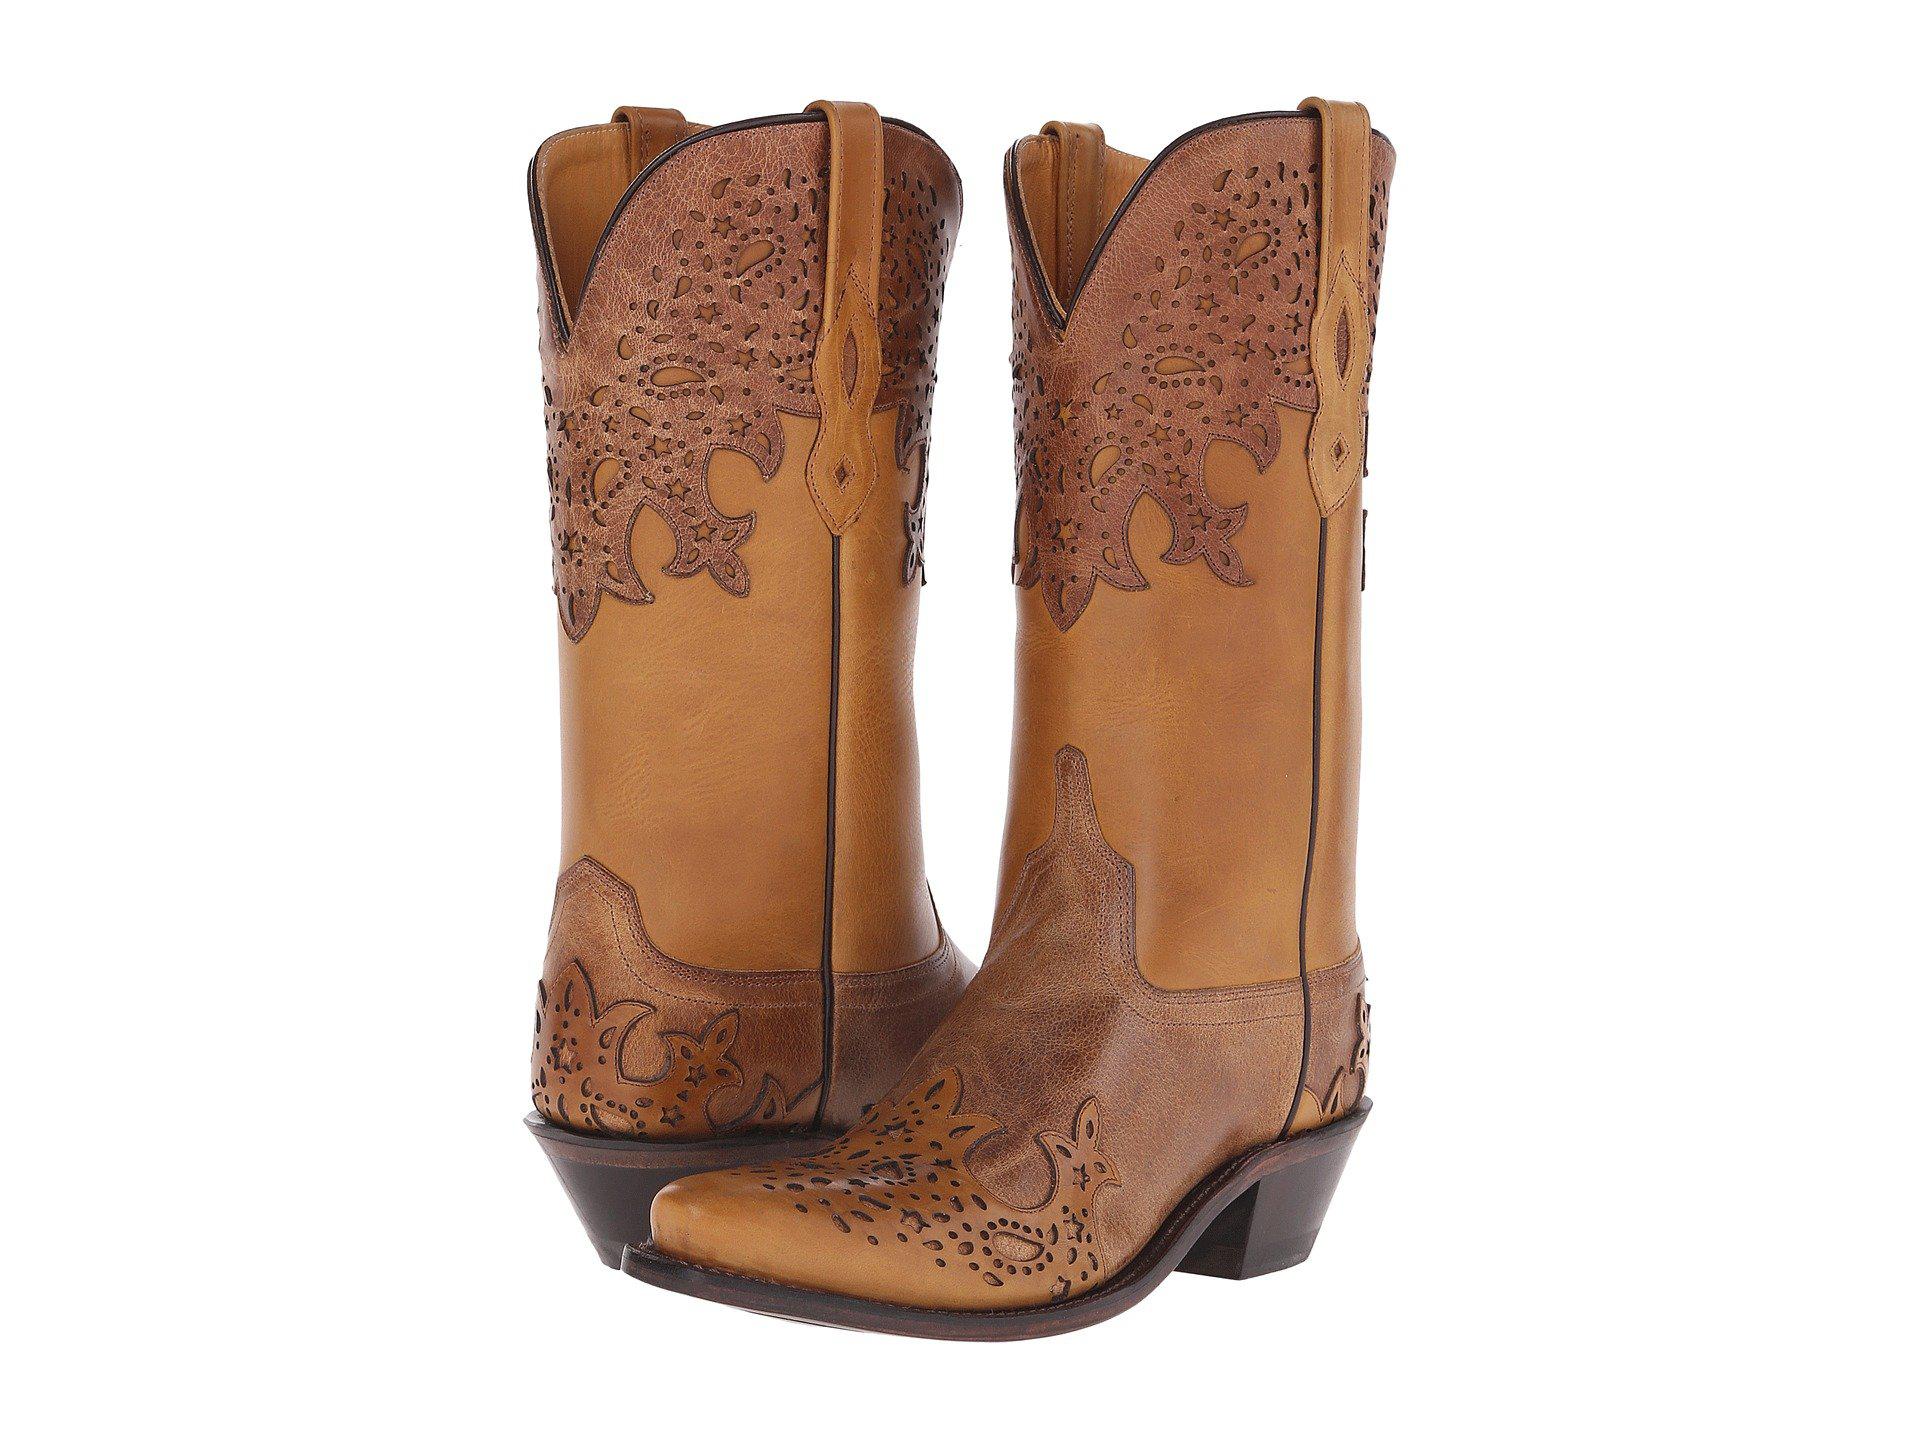 Old West Boots Womens LF1540 Tan Fry/Light Tan Boot